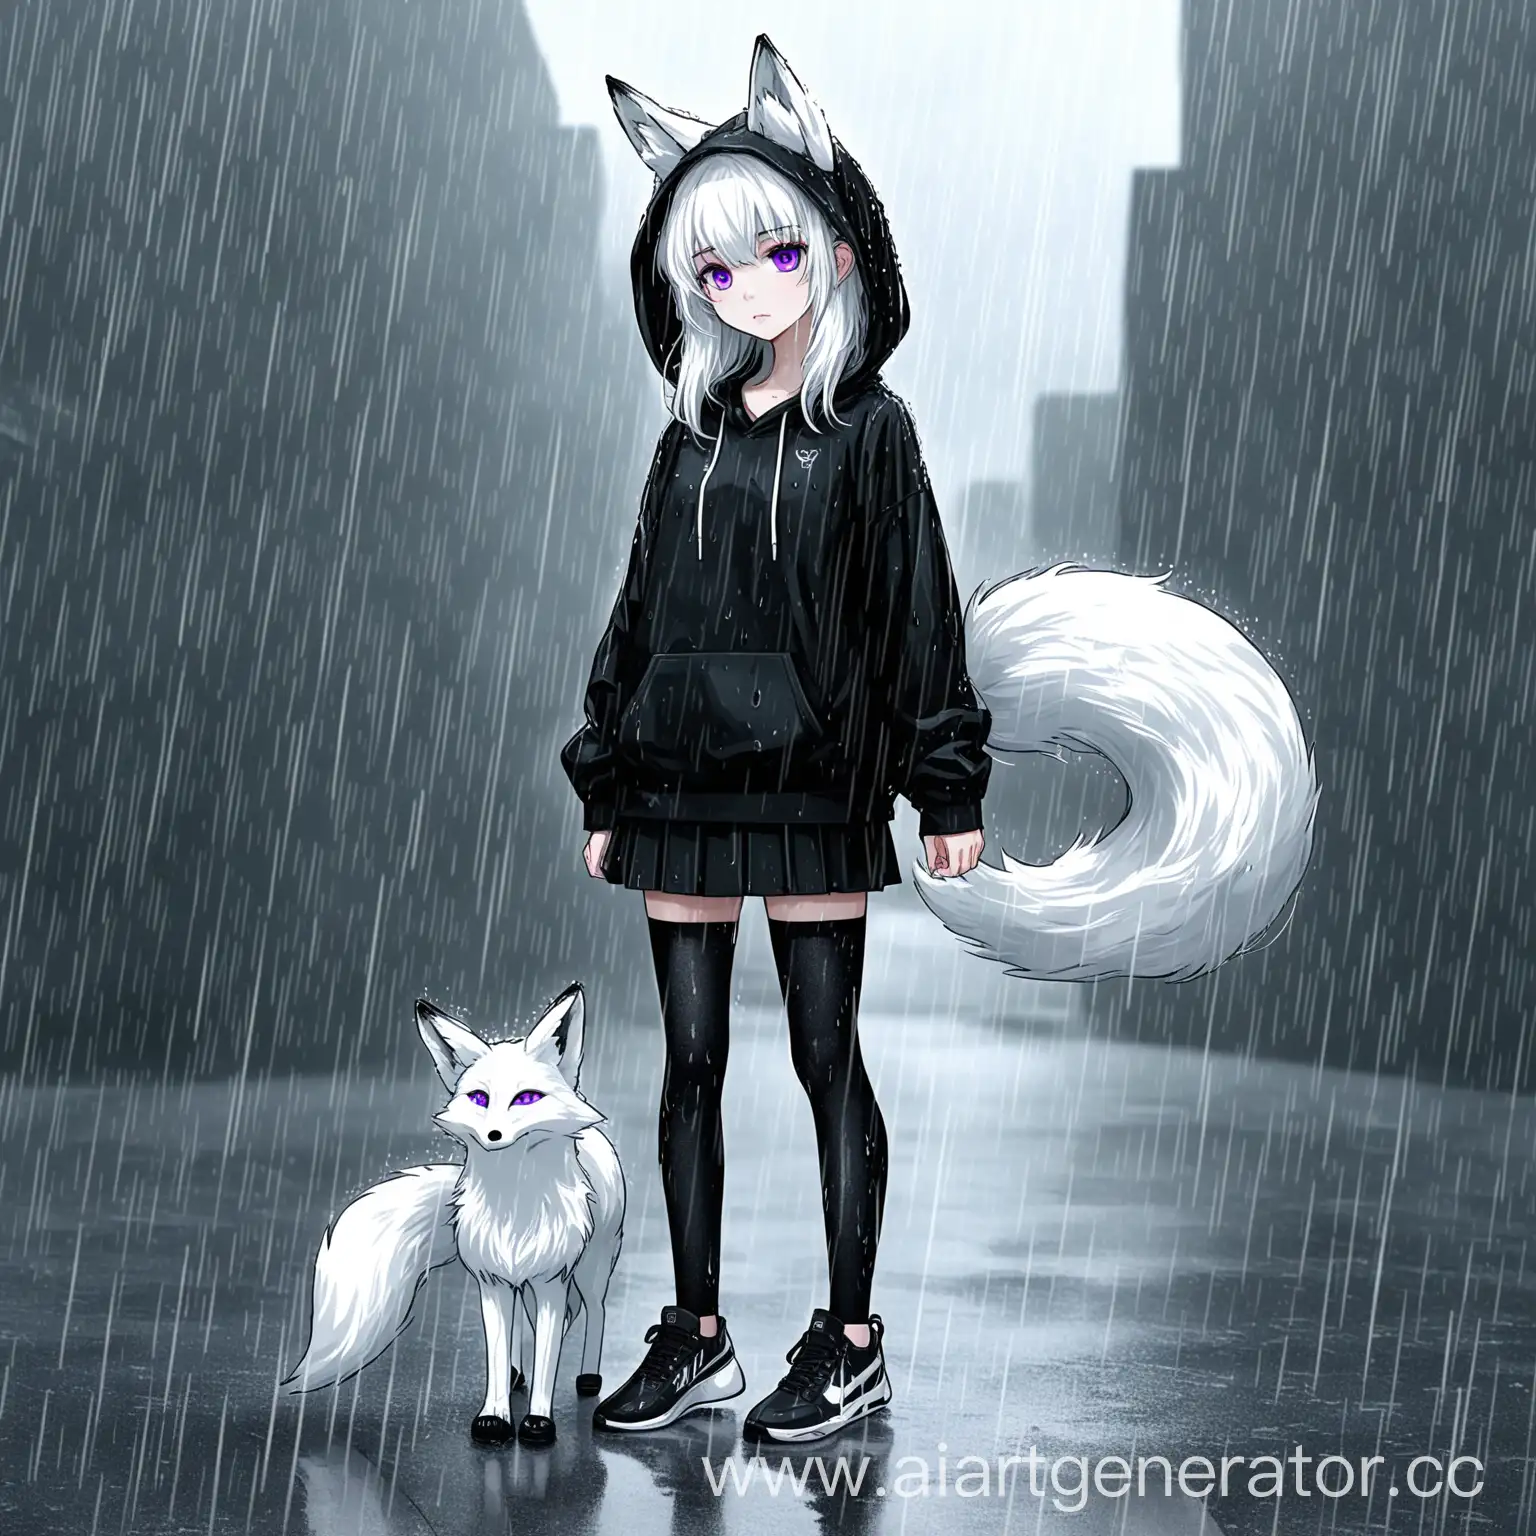 WhiteHaired-Girl-with-Fox-Ears-and-Tail-Walking-with-Foxling-in-the-Rain